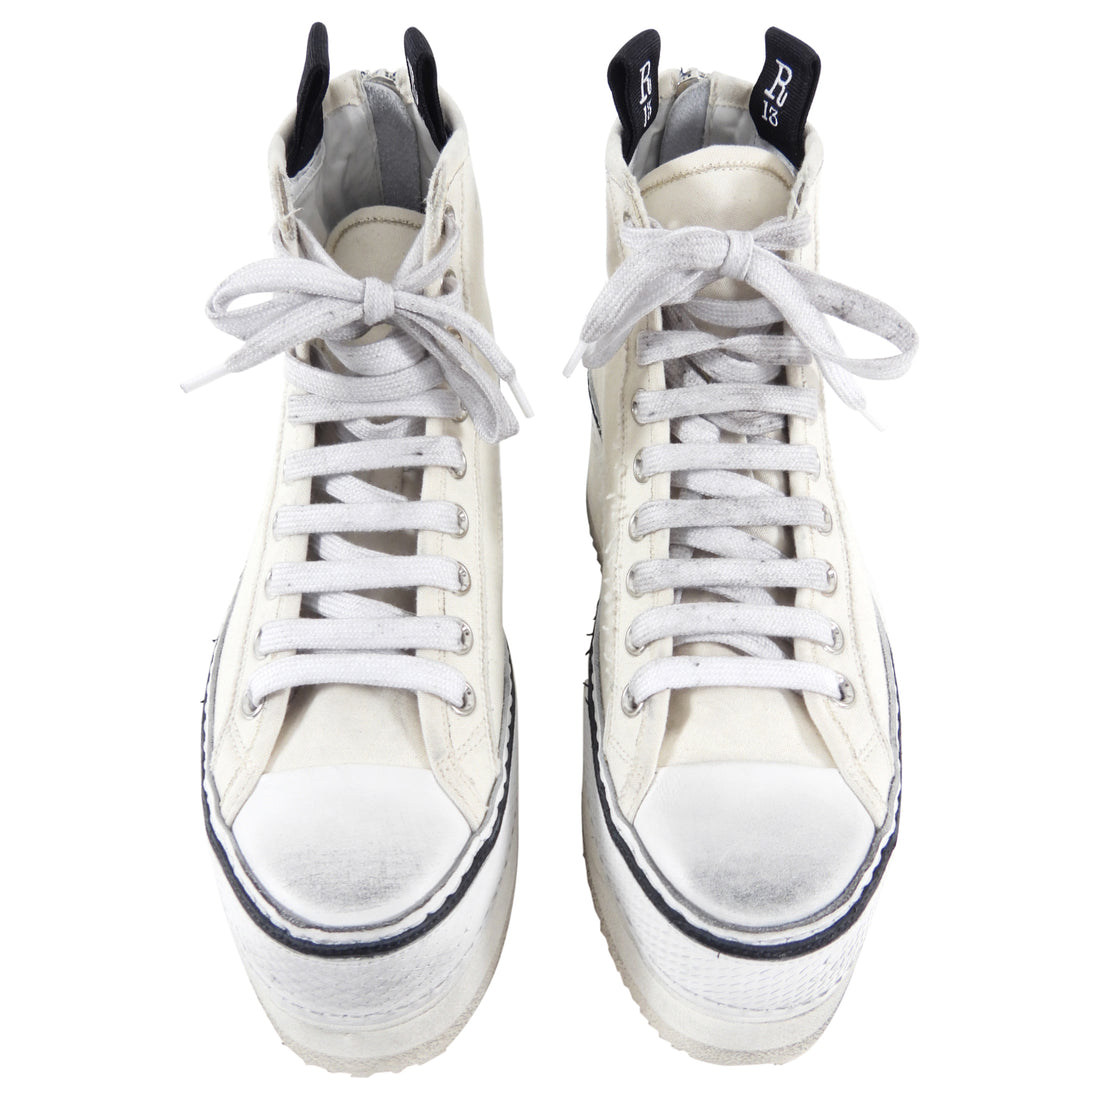 R13 White Distressed Platform High-Top Sneakers - USA 7